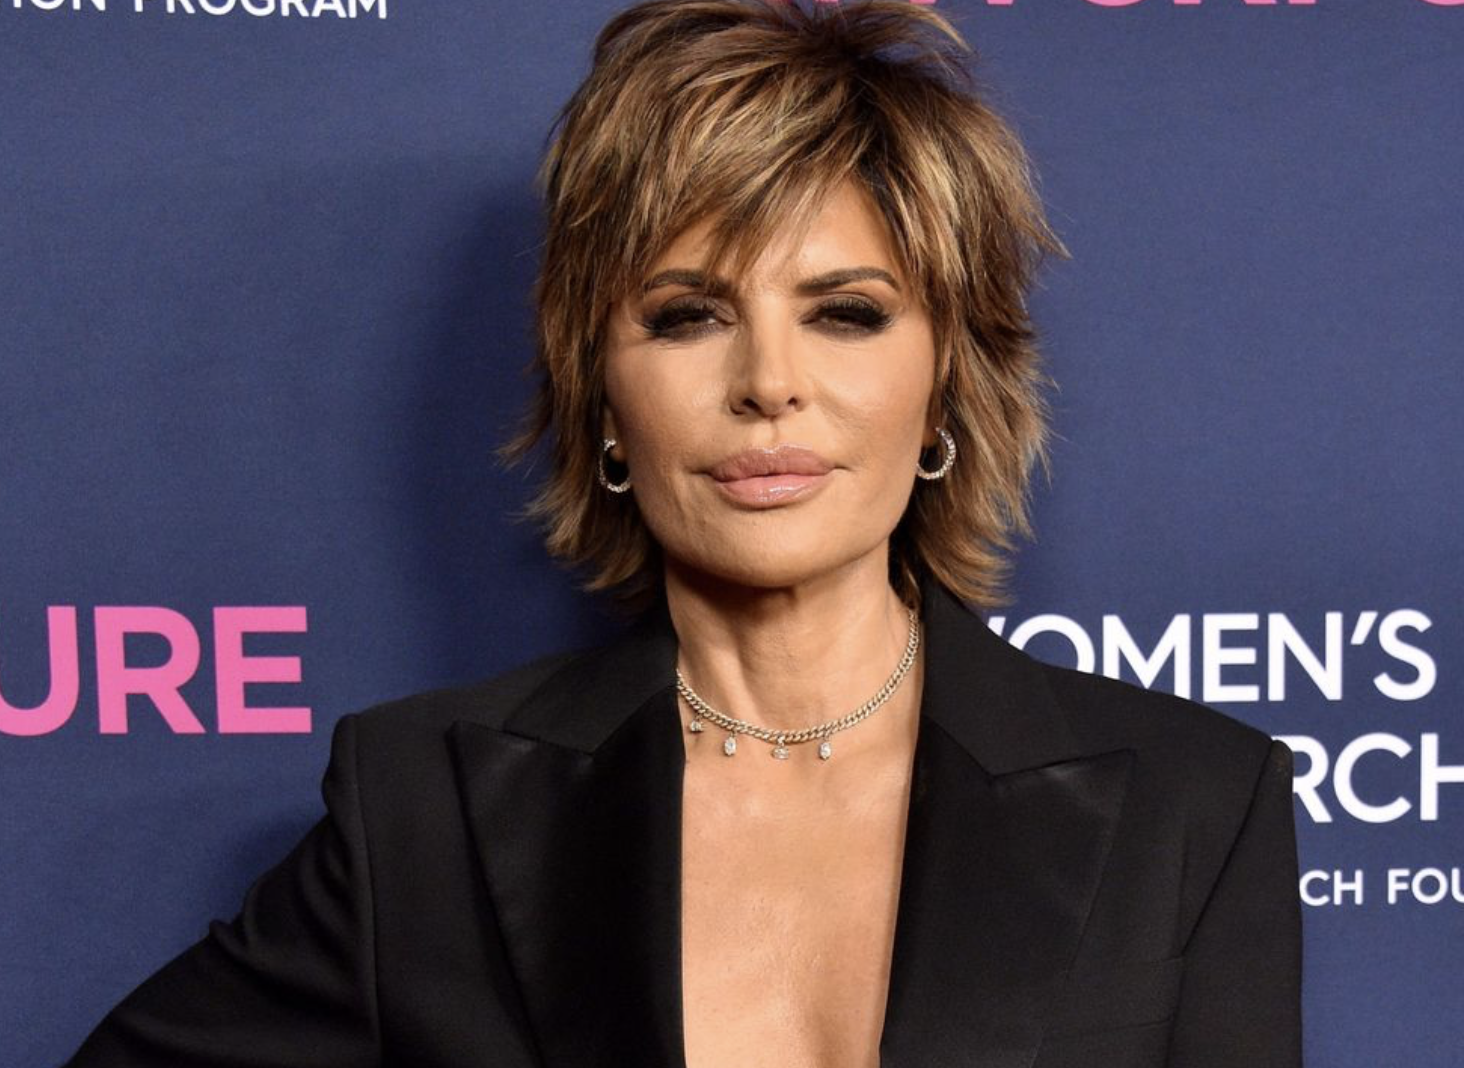 ‘RHOBH’ RECAP: Lisa Rinna GOES OFF On Denise Richards For Claiming Brandi Glanville Slept with Other Housewives!